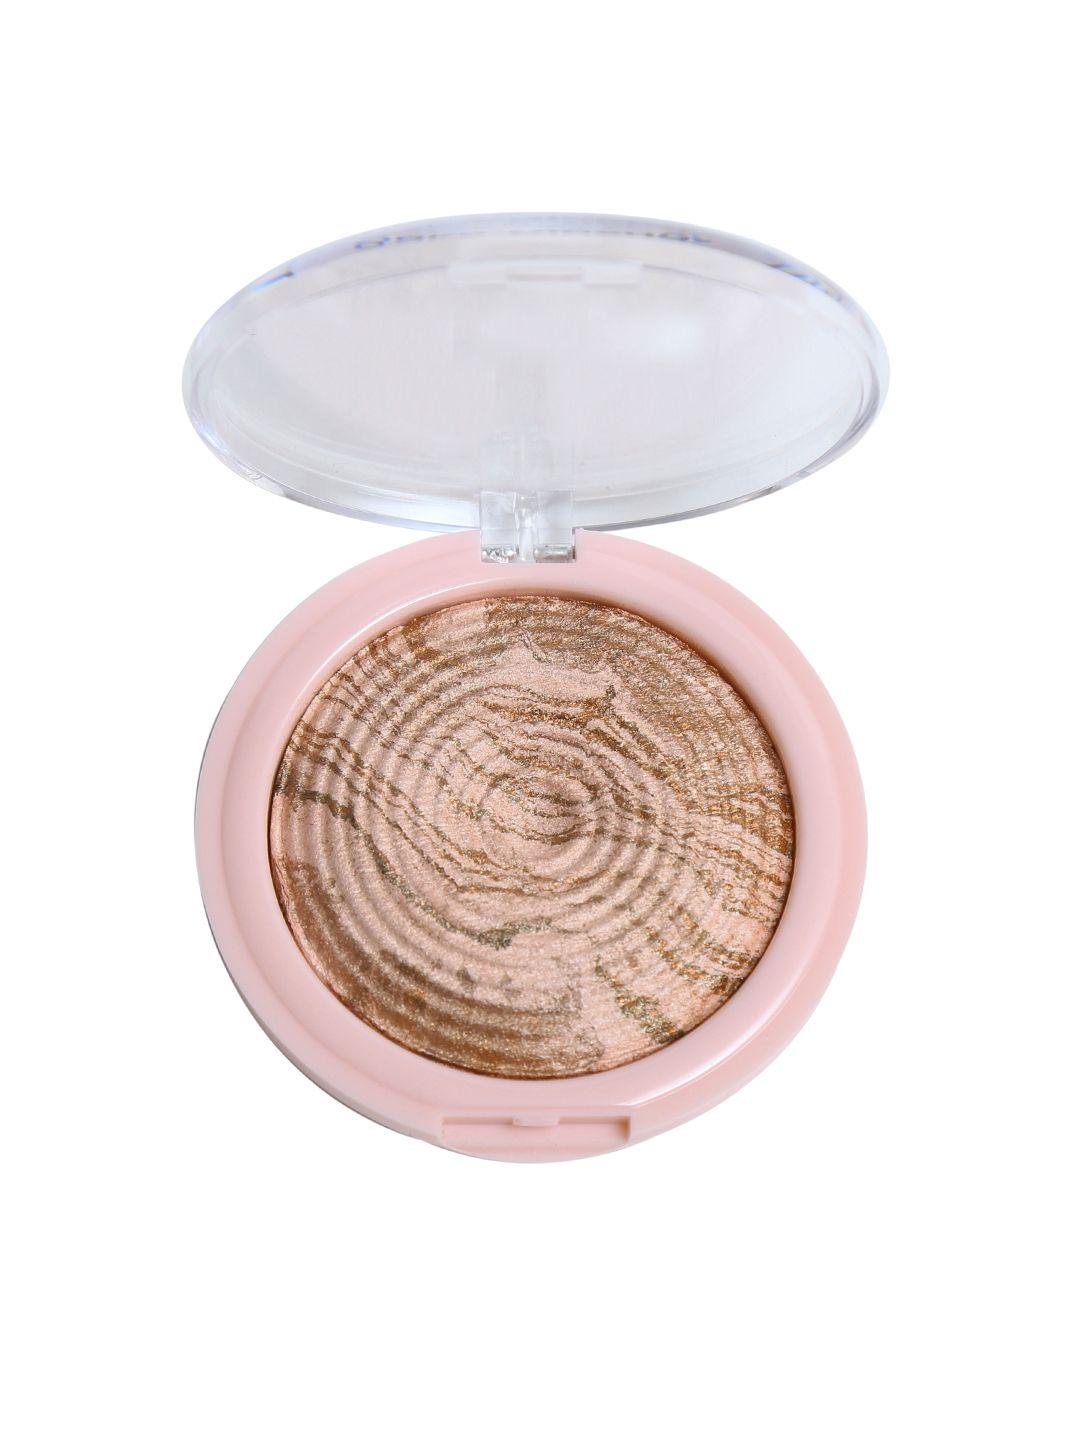 miss claire 06 baked blusher 8g